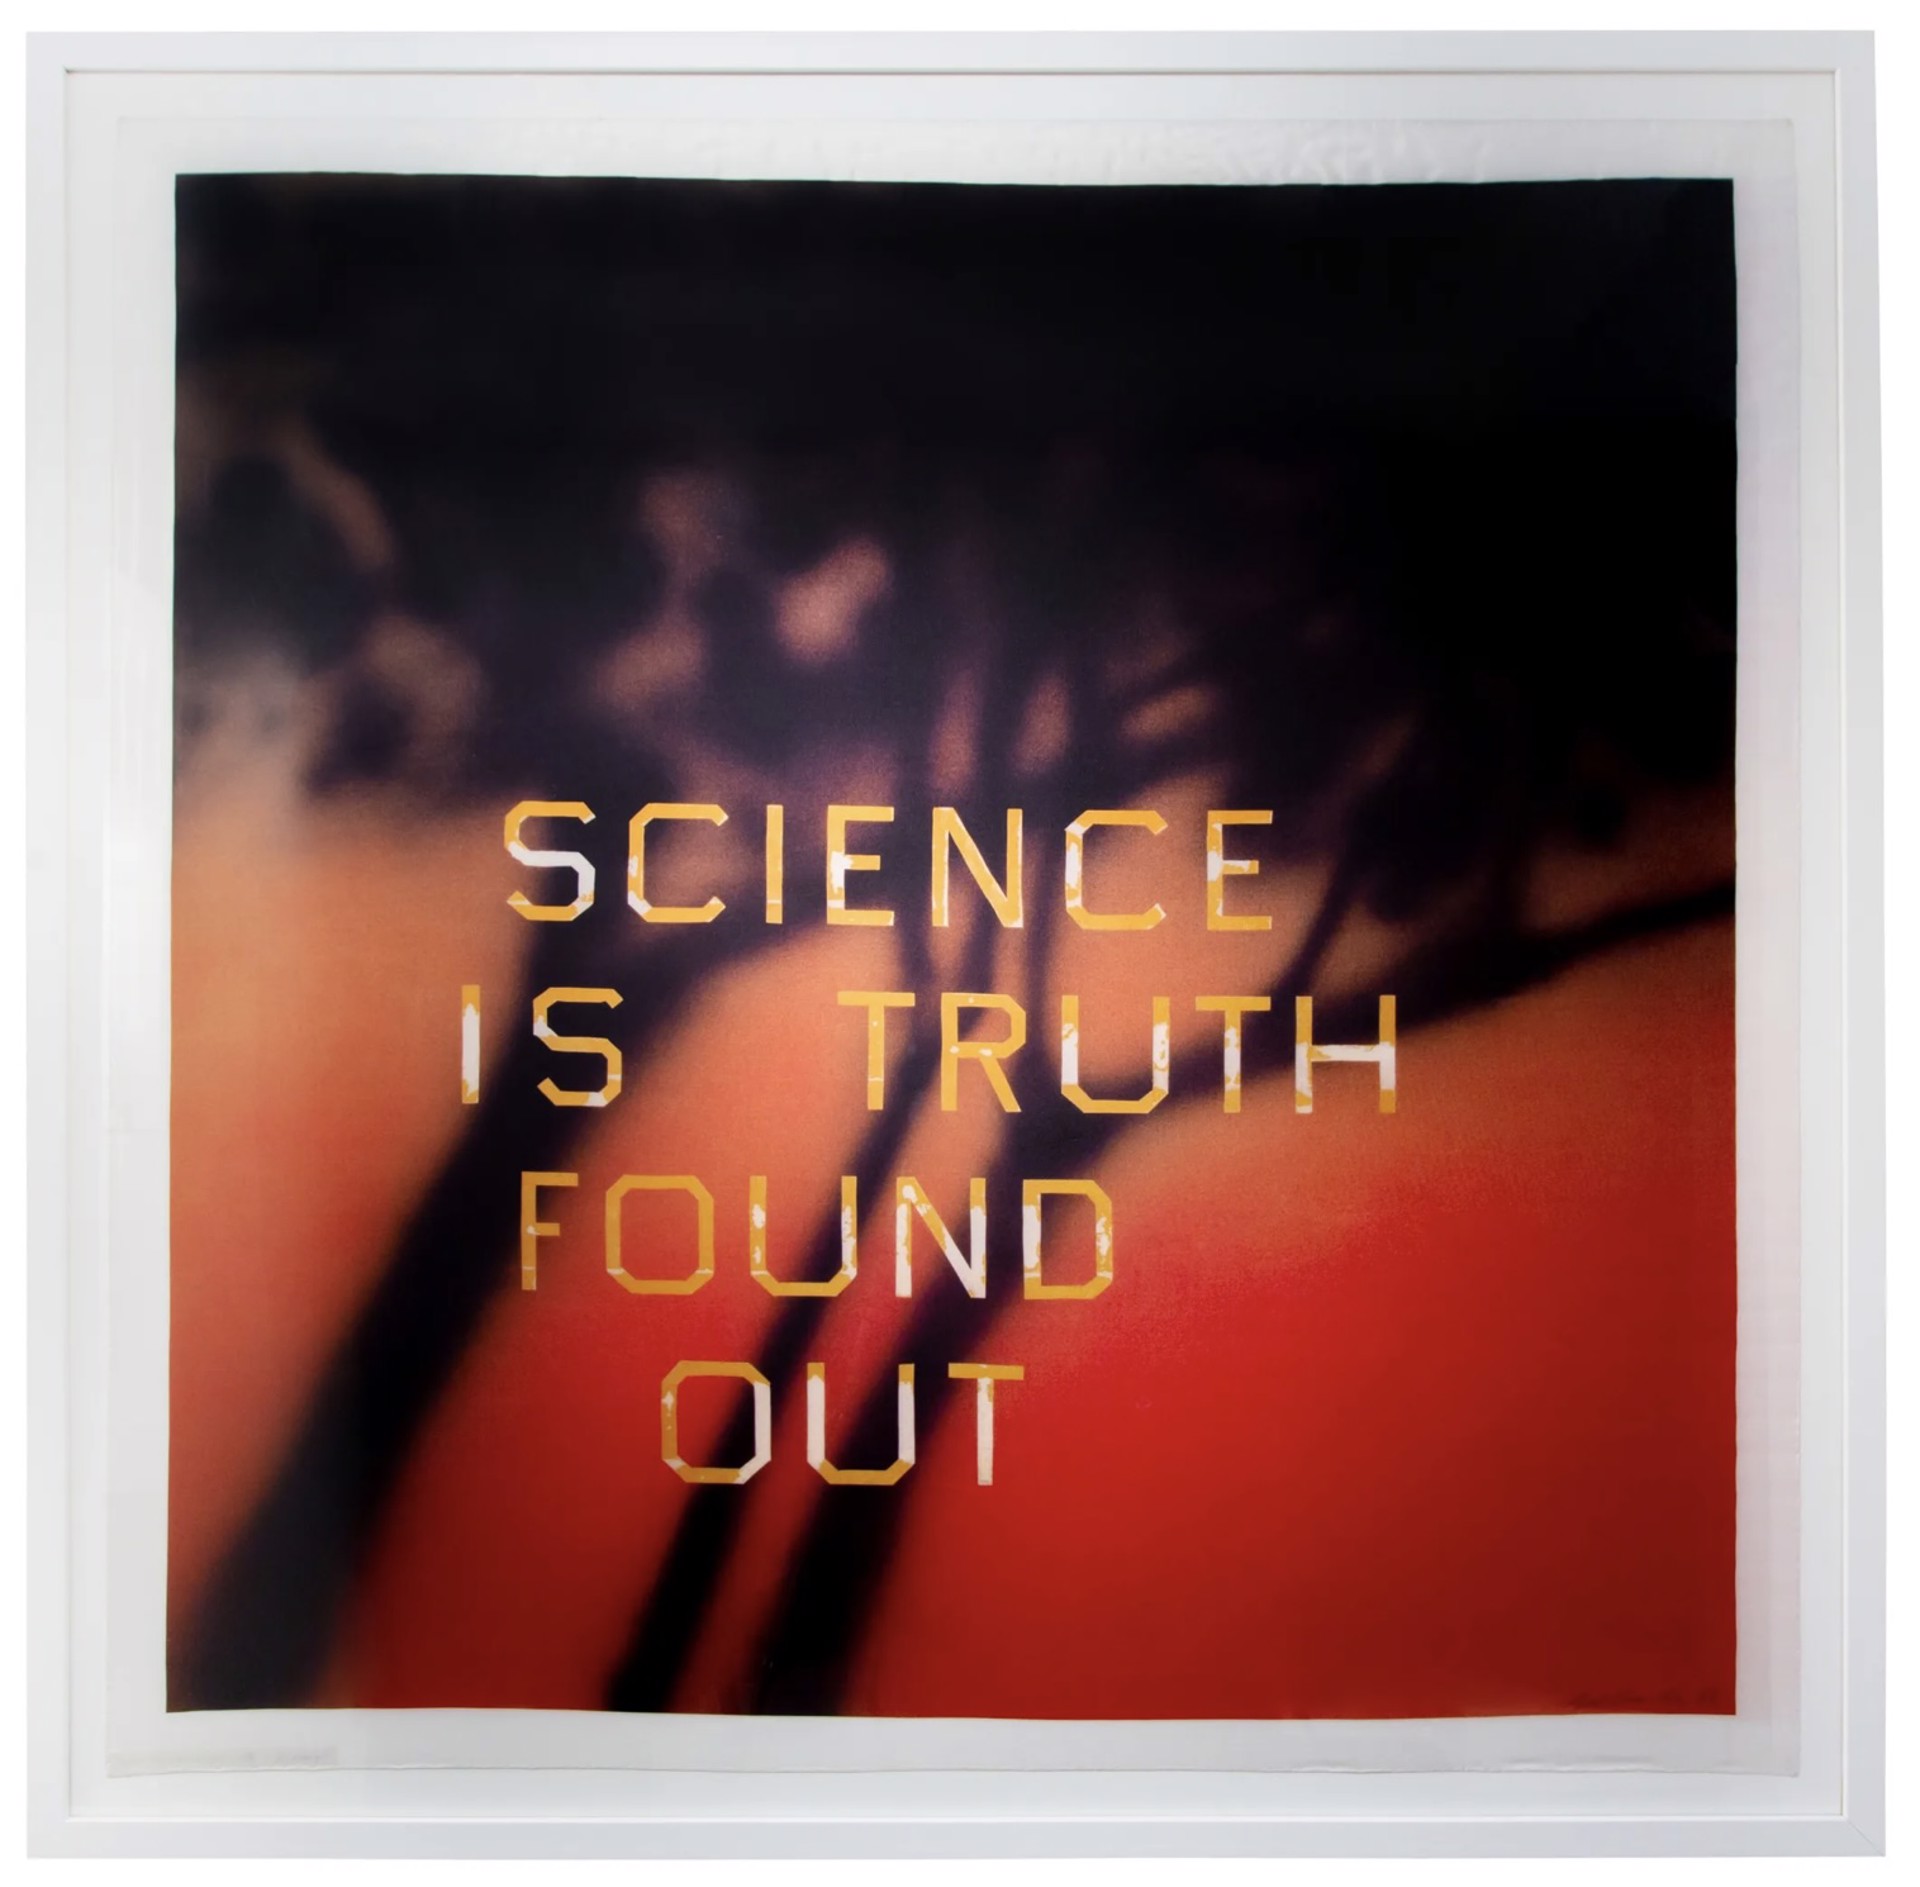 Truth Is Science Found Out by Ed Ruscha